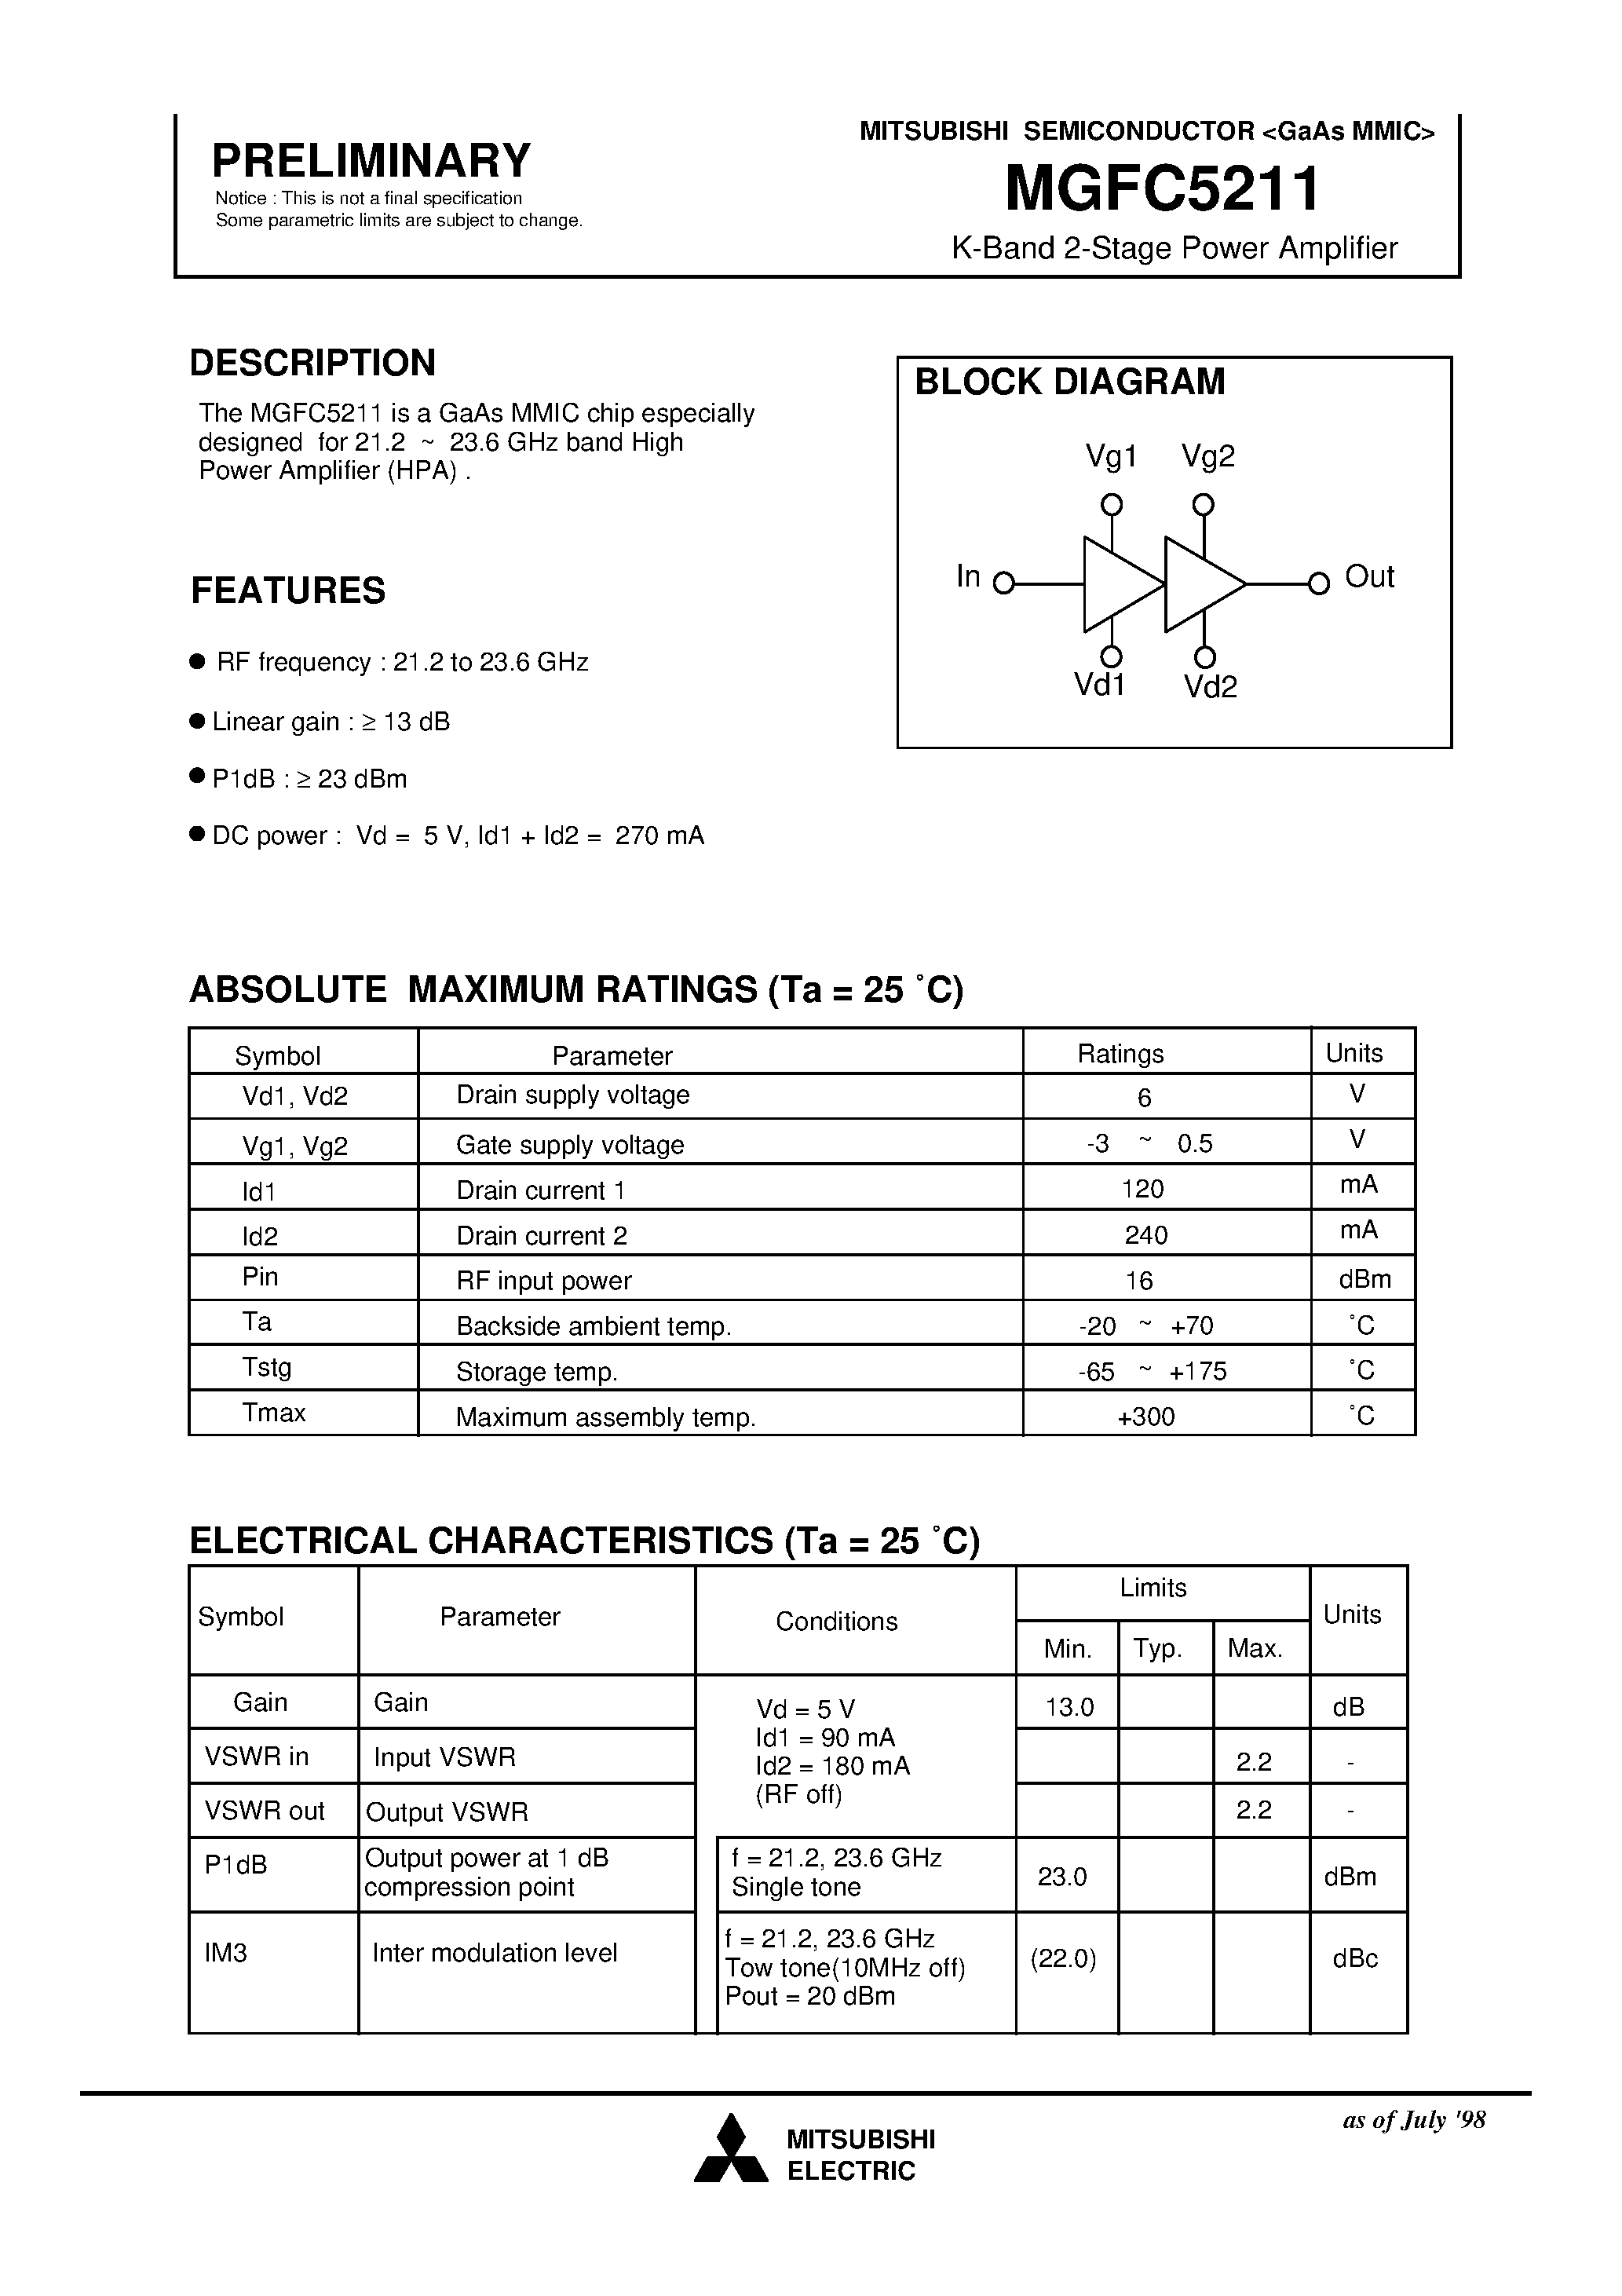 Datasheet MGFC5211 - K-Band 2-Stage Power Amplifier page 1